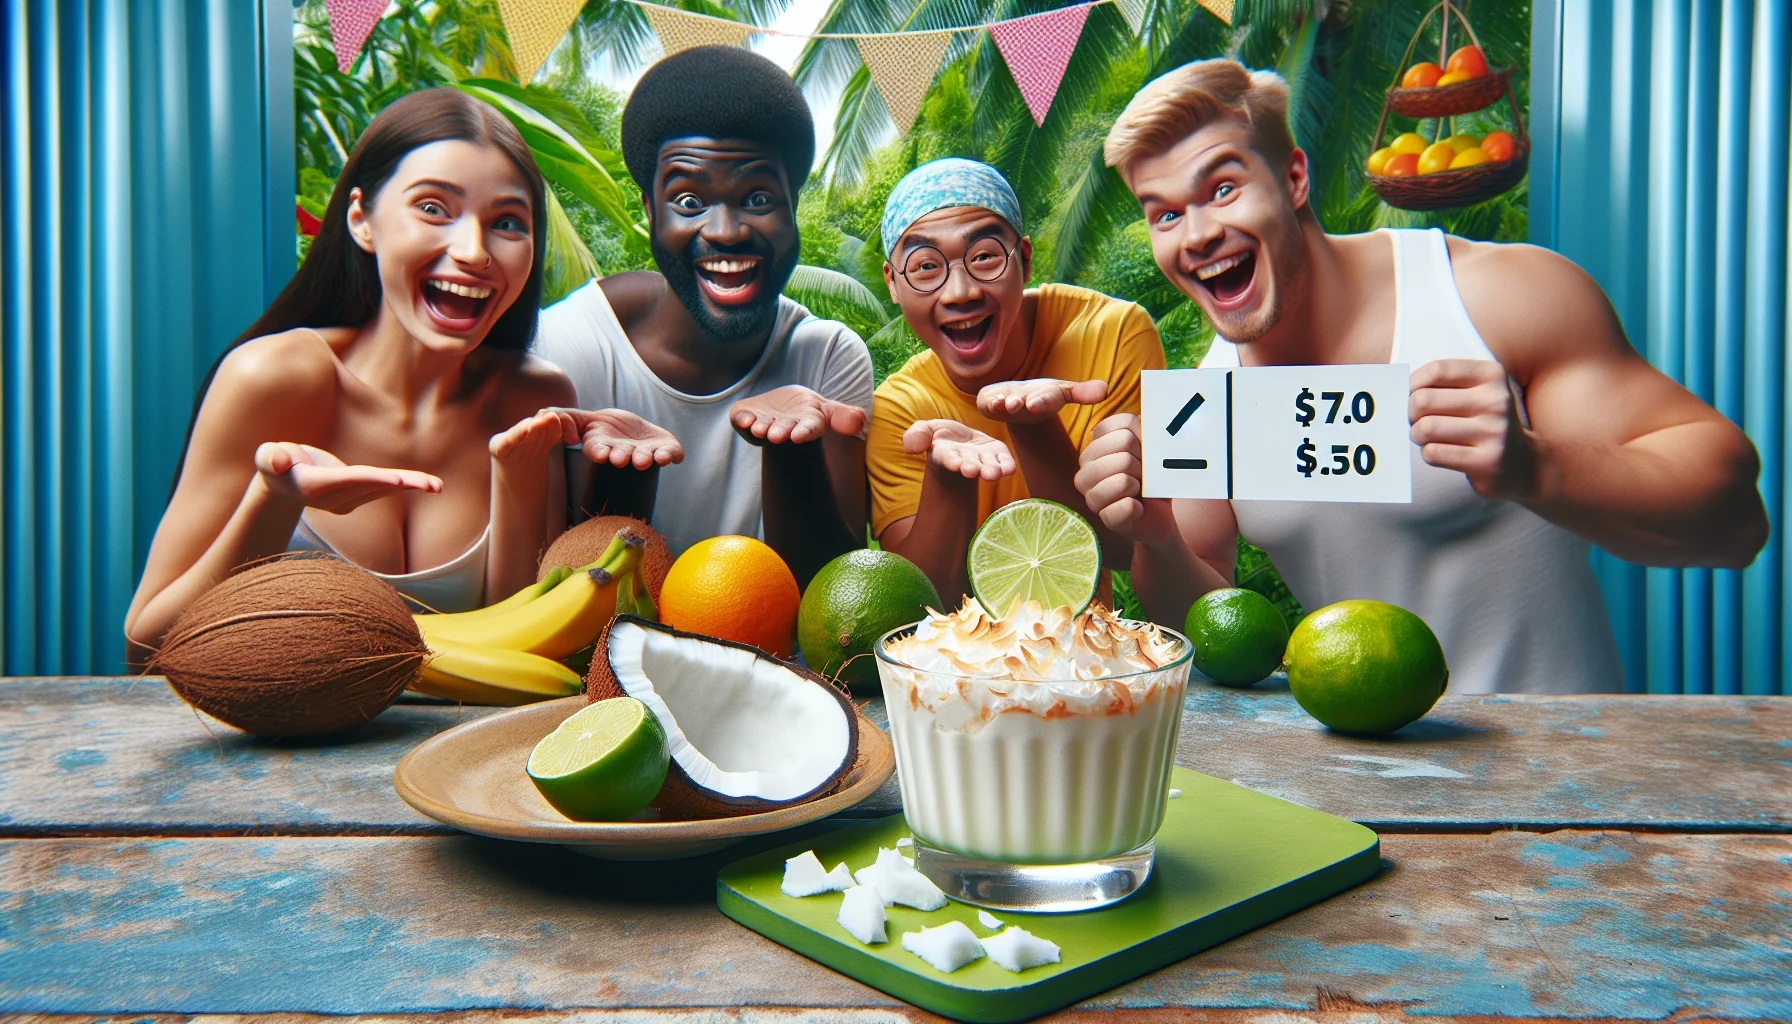 Picture a humorous and appealing scenario set in a tropical ambiance. A coconut and lime mousse dessert is sitting appealingly on a table, the creamy texture vividly evident, garnished with a zesty lime slice and coconut flakes. Next to it is a playful sign that shows a comparison of prices, emphasizing the affordability of this healthy dessert. Background full of vibrant tropical plants and fruits. A variety of people, including a Black woman, an Asian man, and a Caucasian teenager are seen excitedly reaching for the mousse, smiles evident on their faces, suggesting the enjoyment of eating healthy for less money.